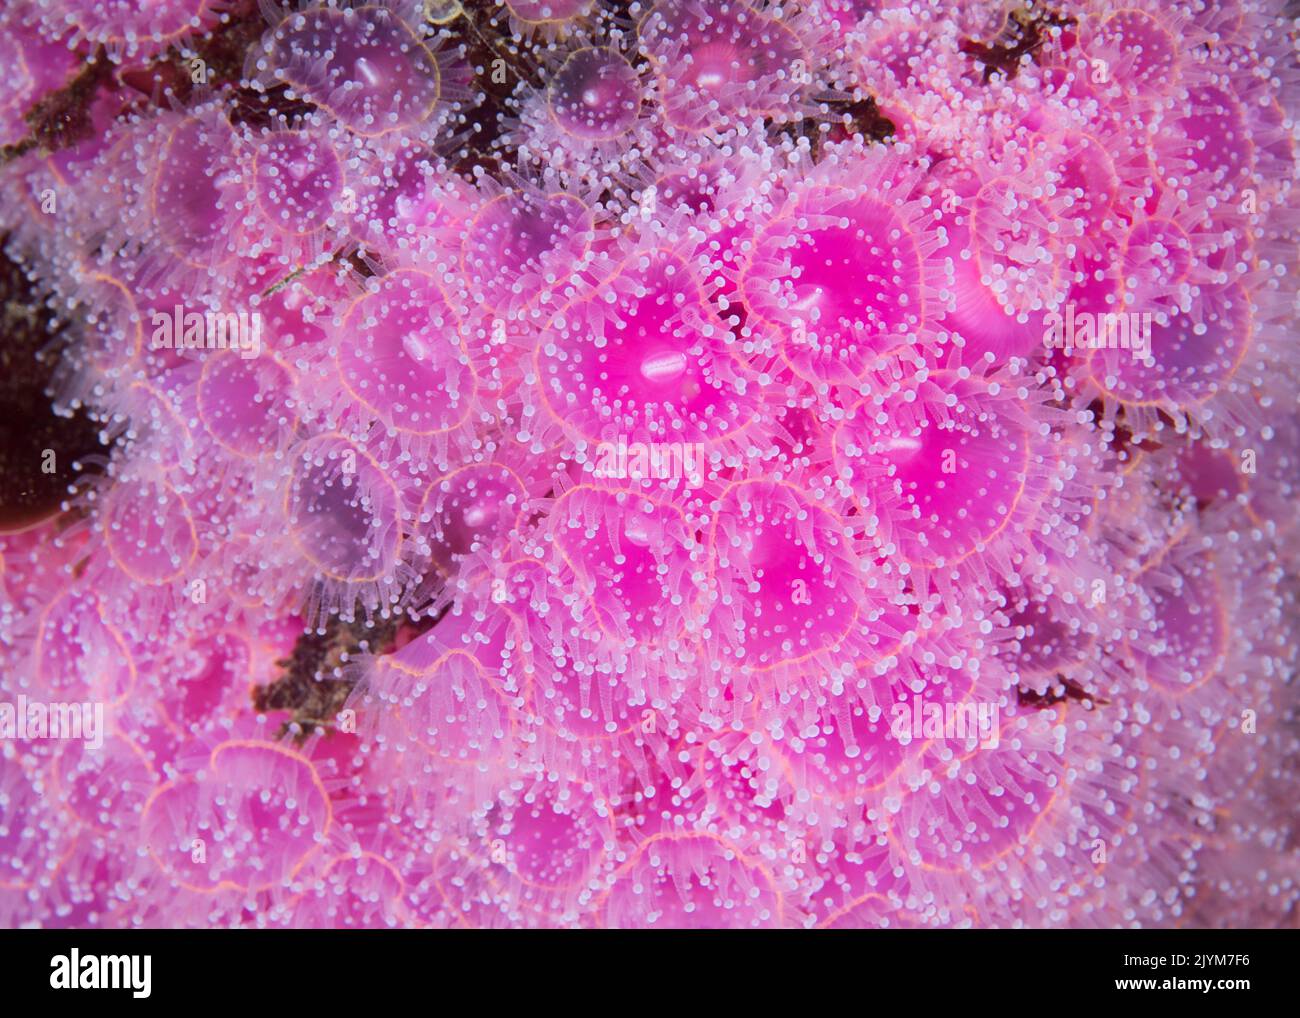 Closeup of bright colored Strawberry Anemones (Actinia fragacea) grouped together Stock Photo